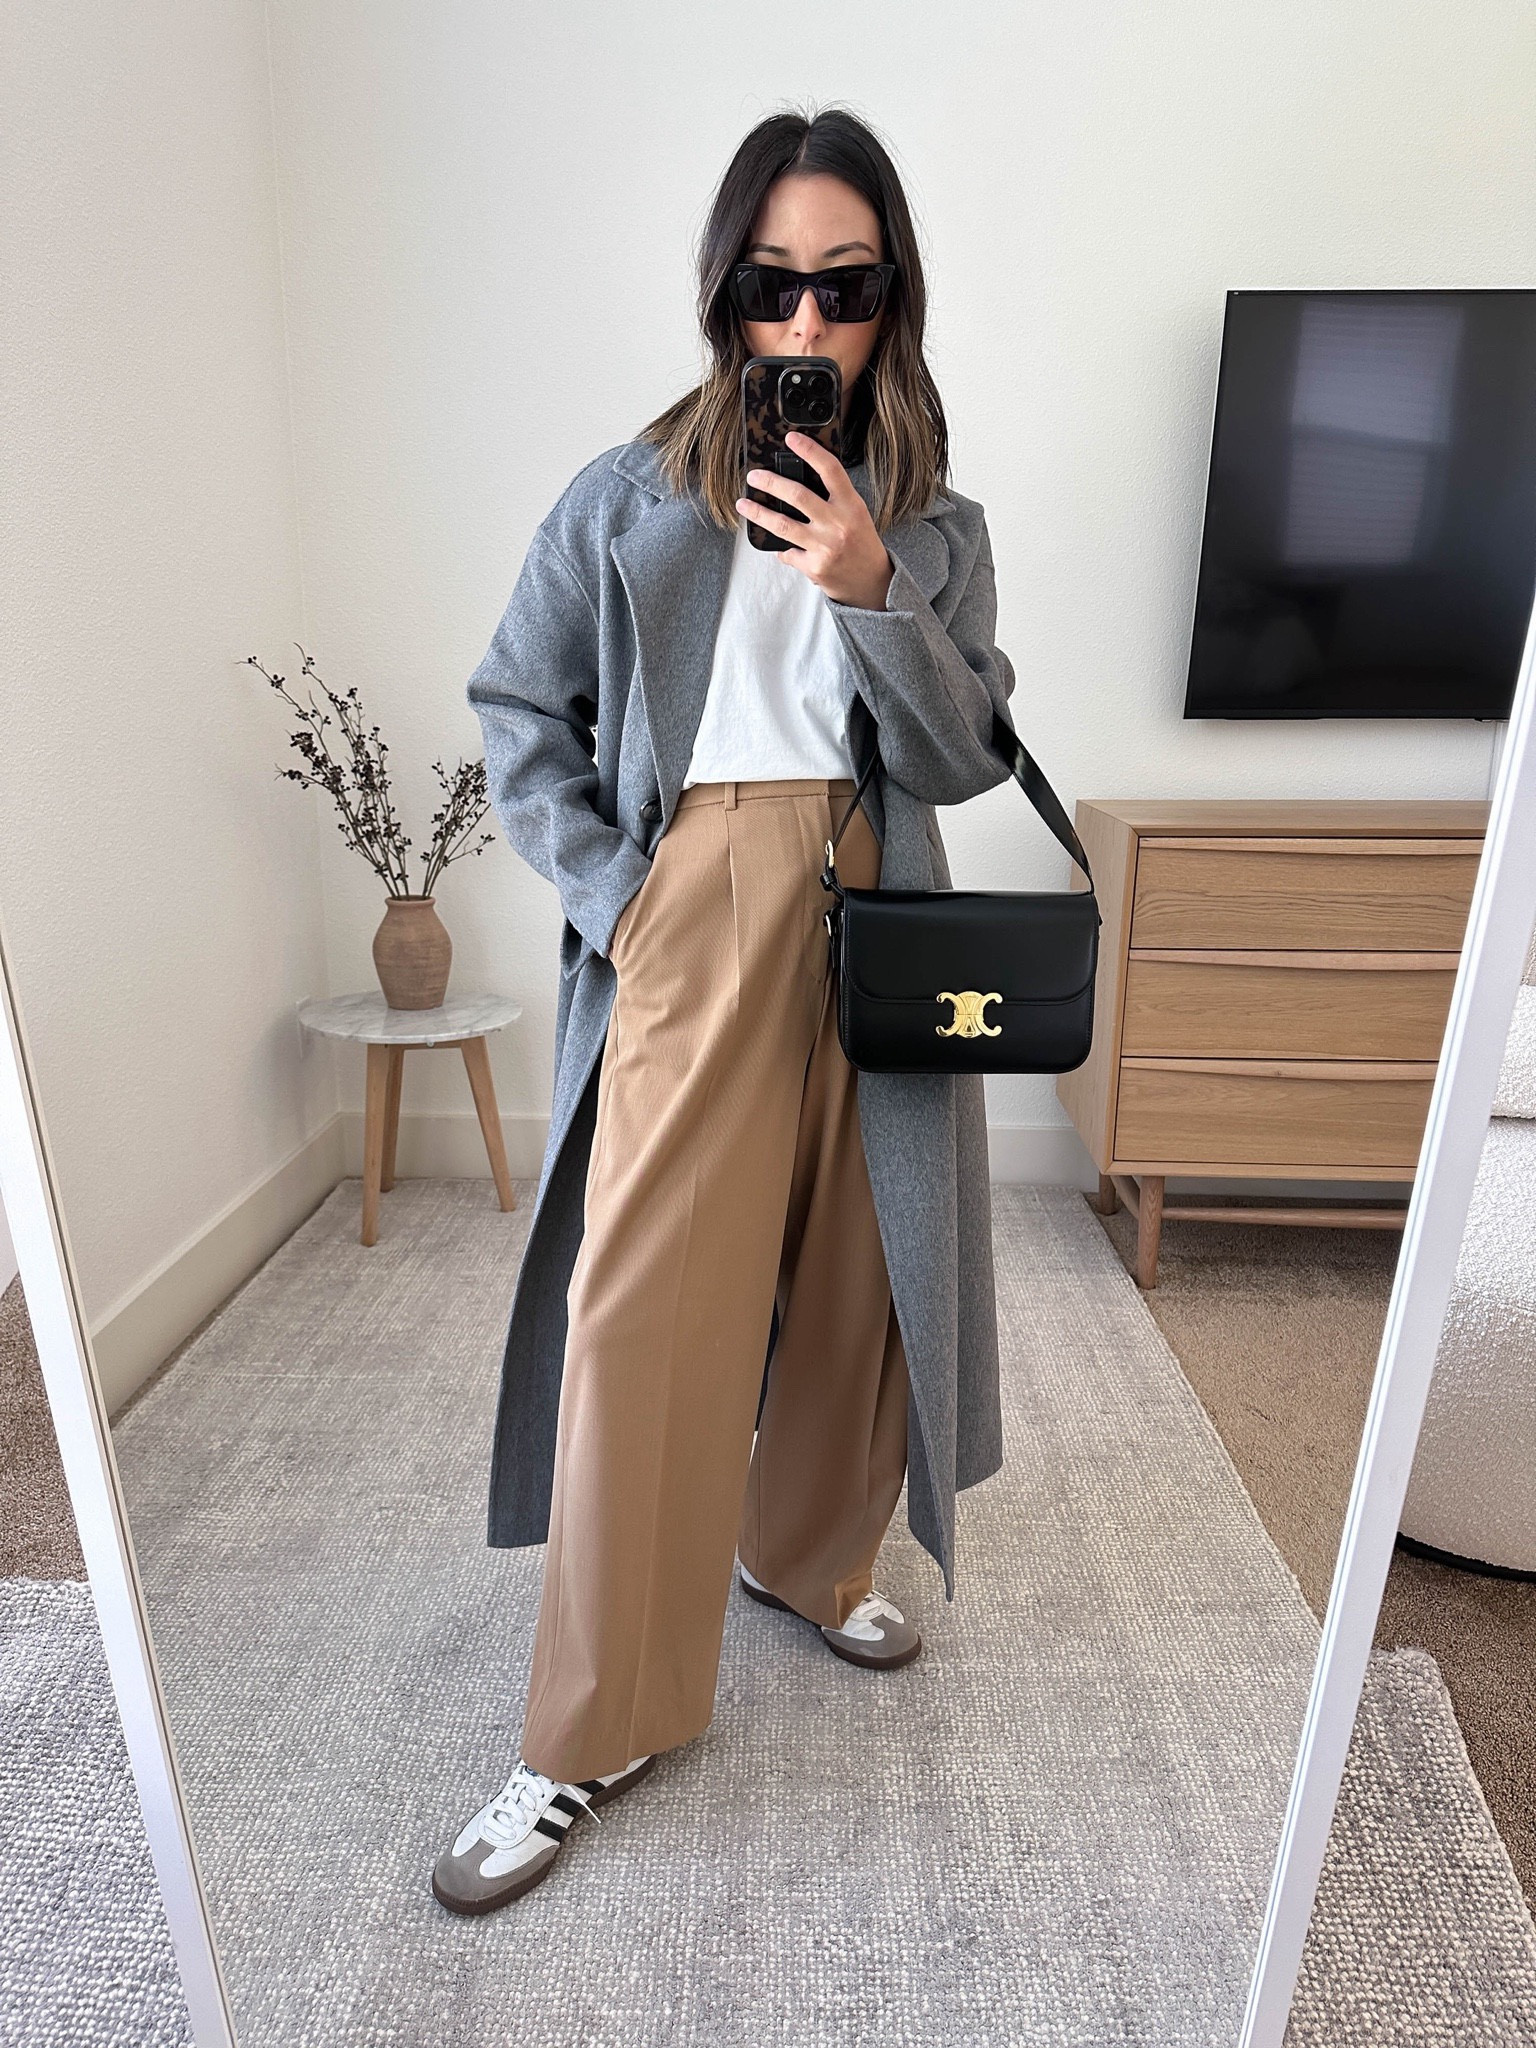 WOMEN vs MEN's pleated pants from uniqlo 👀, Gallery posted by cloudcalm